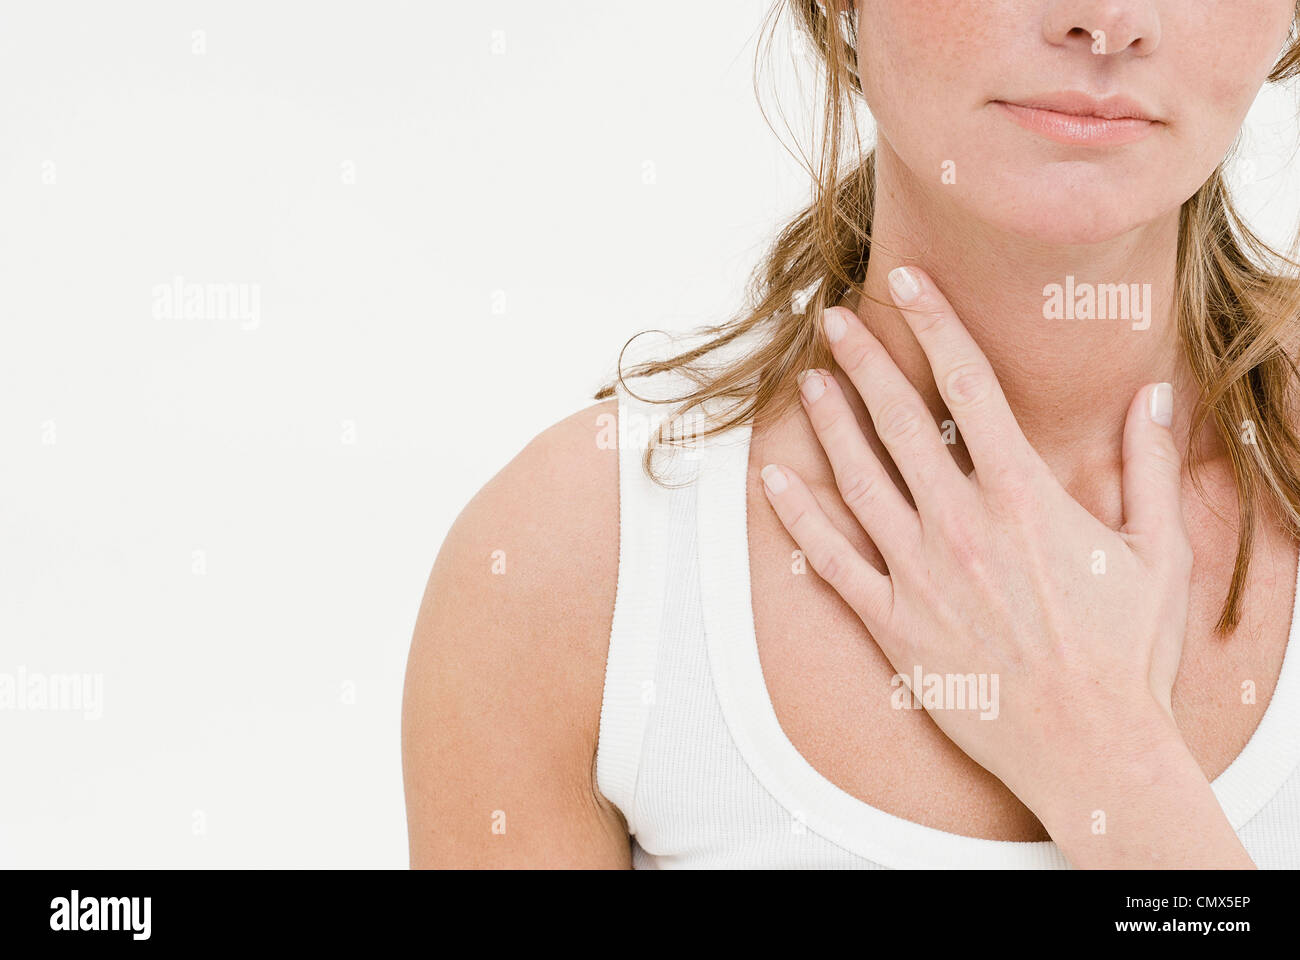 Young woman touching neck, close up Stock Photo